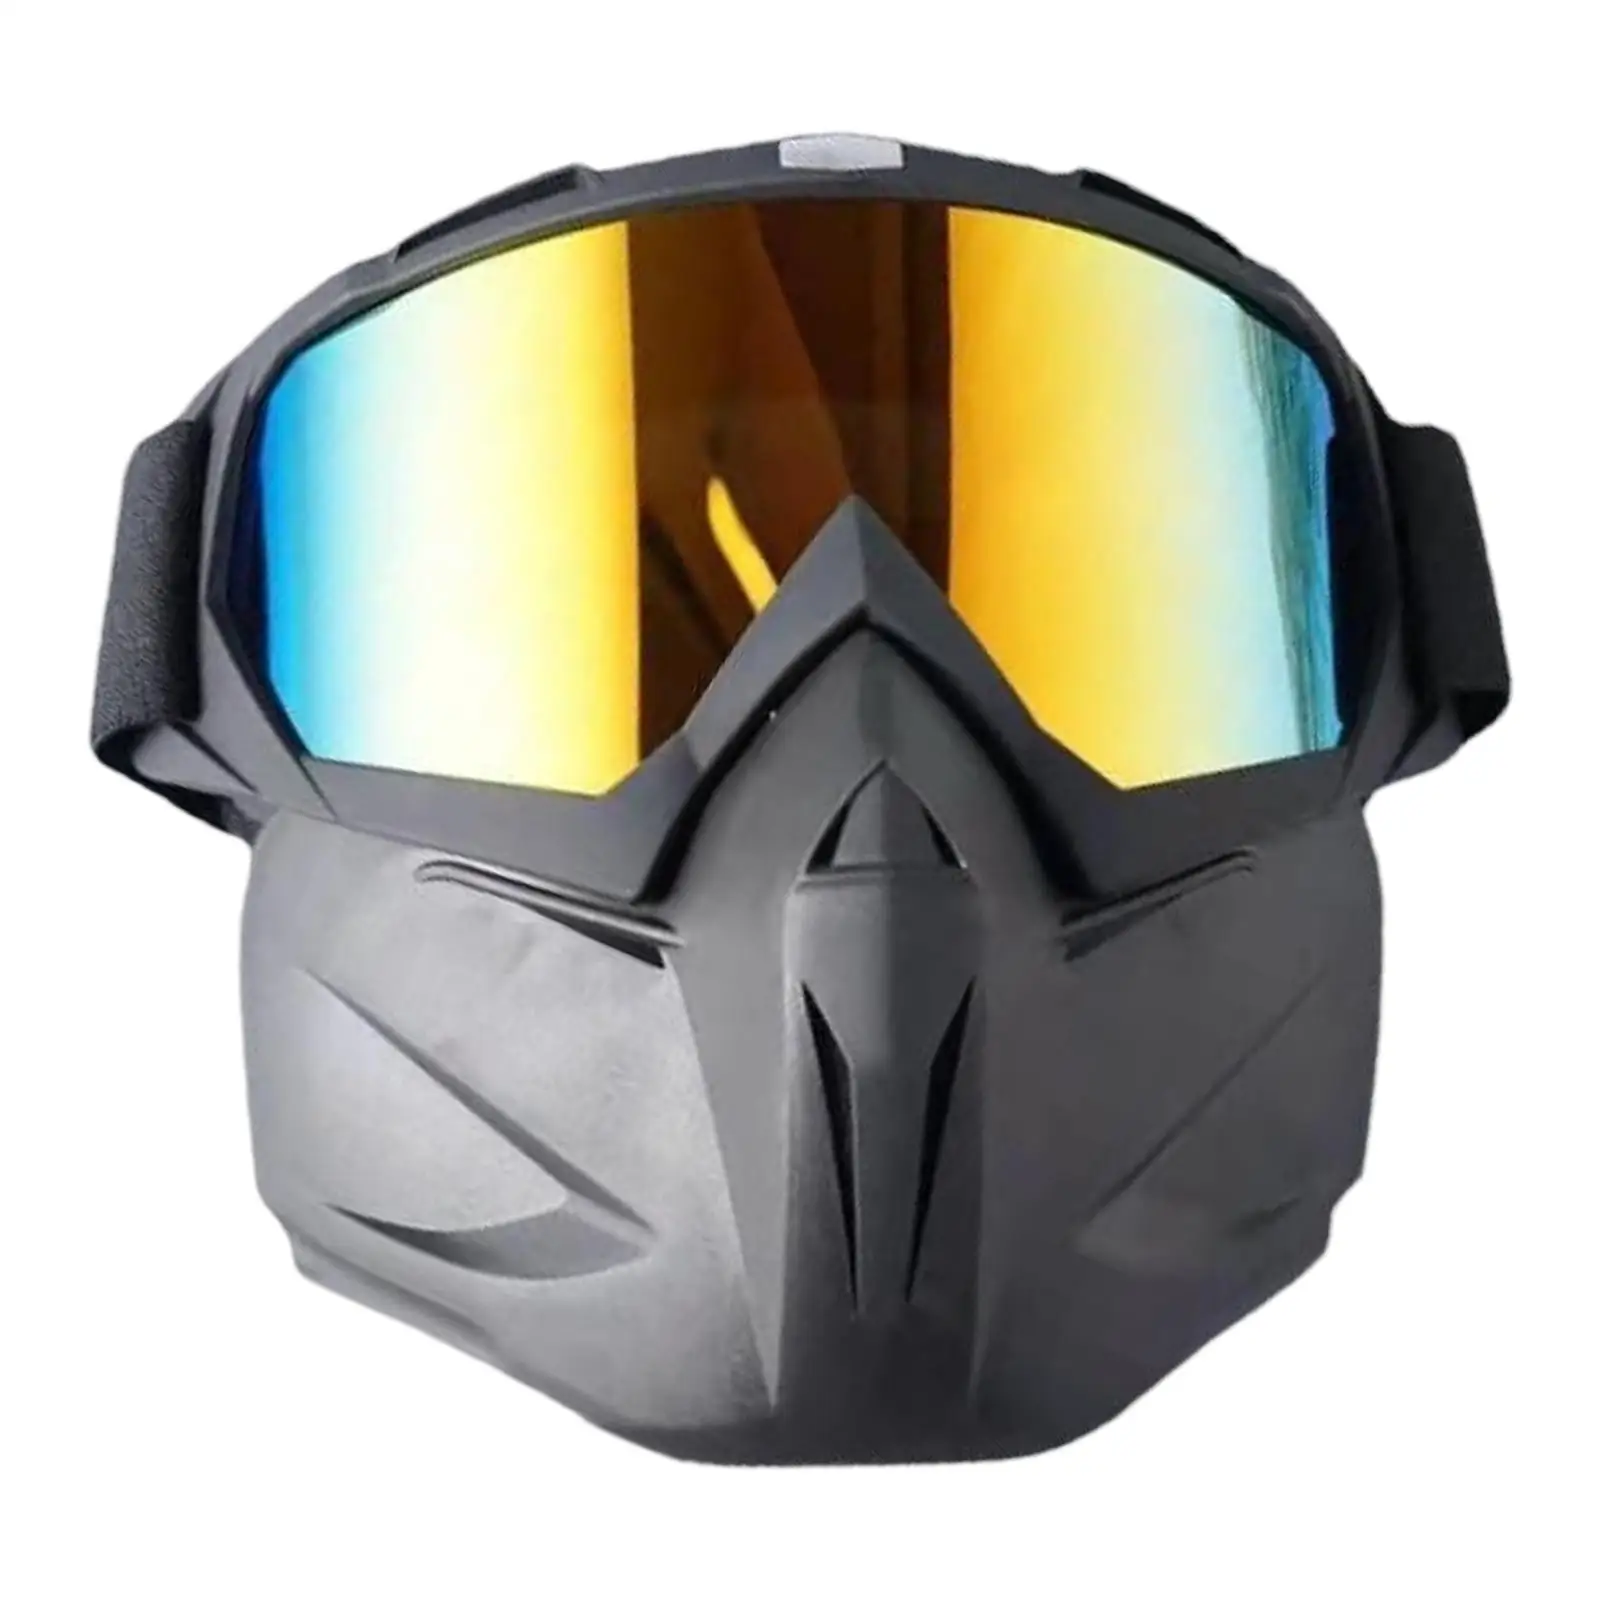 Motorcycle Goggles Mask Adjustable Outdoor Mask Fits for Skiing Snowmobile